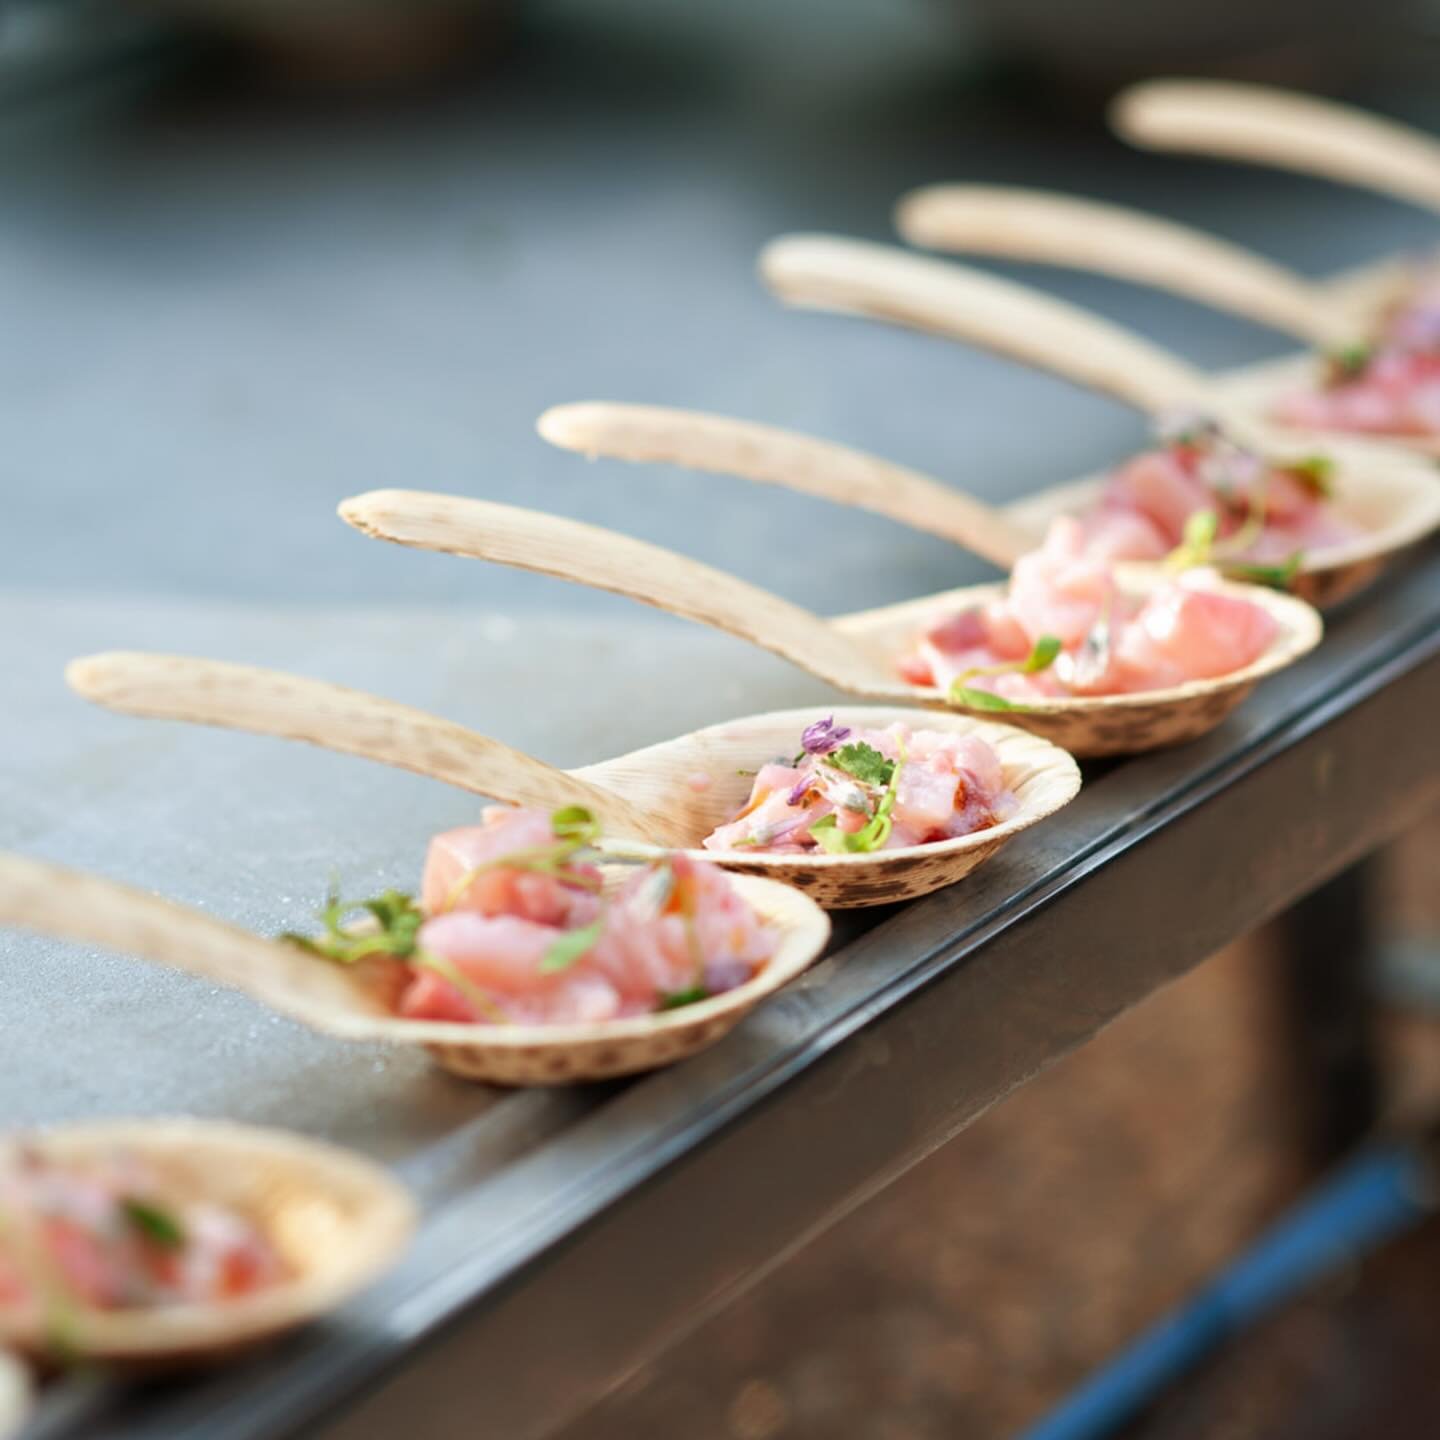 Calgary&rsquo;s culinary elite converge at #ros&eacute;andcroquetyyc to tantalize your taste buds and elevate the #gardenparty experience. Savour delicious creations from the city&rsquo;s best restaurants and chefs. 
@deanehouseyyc @rivercafeyyc @rou